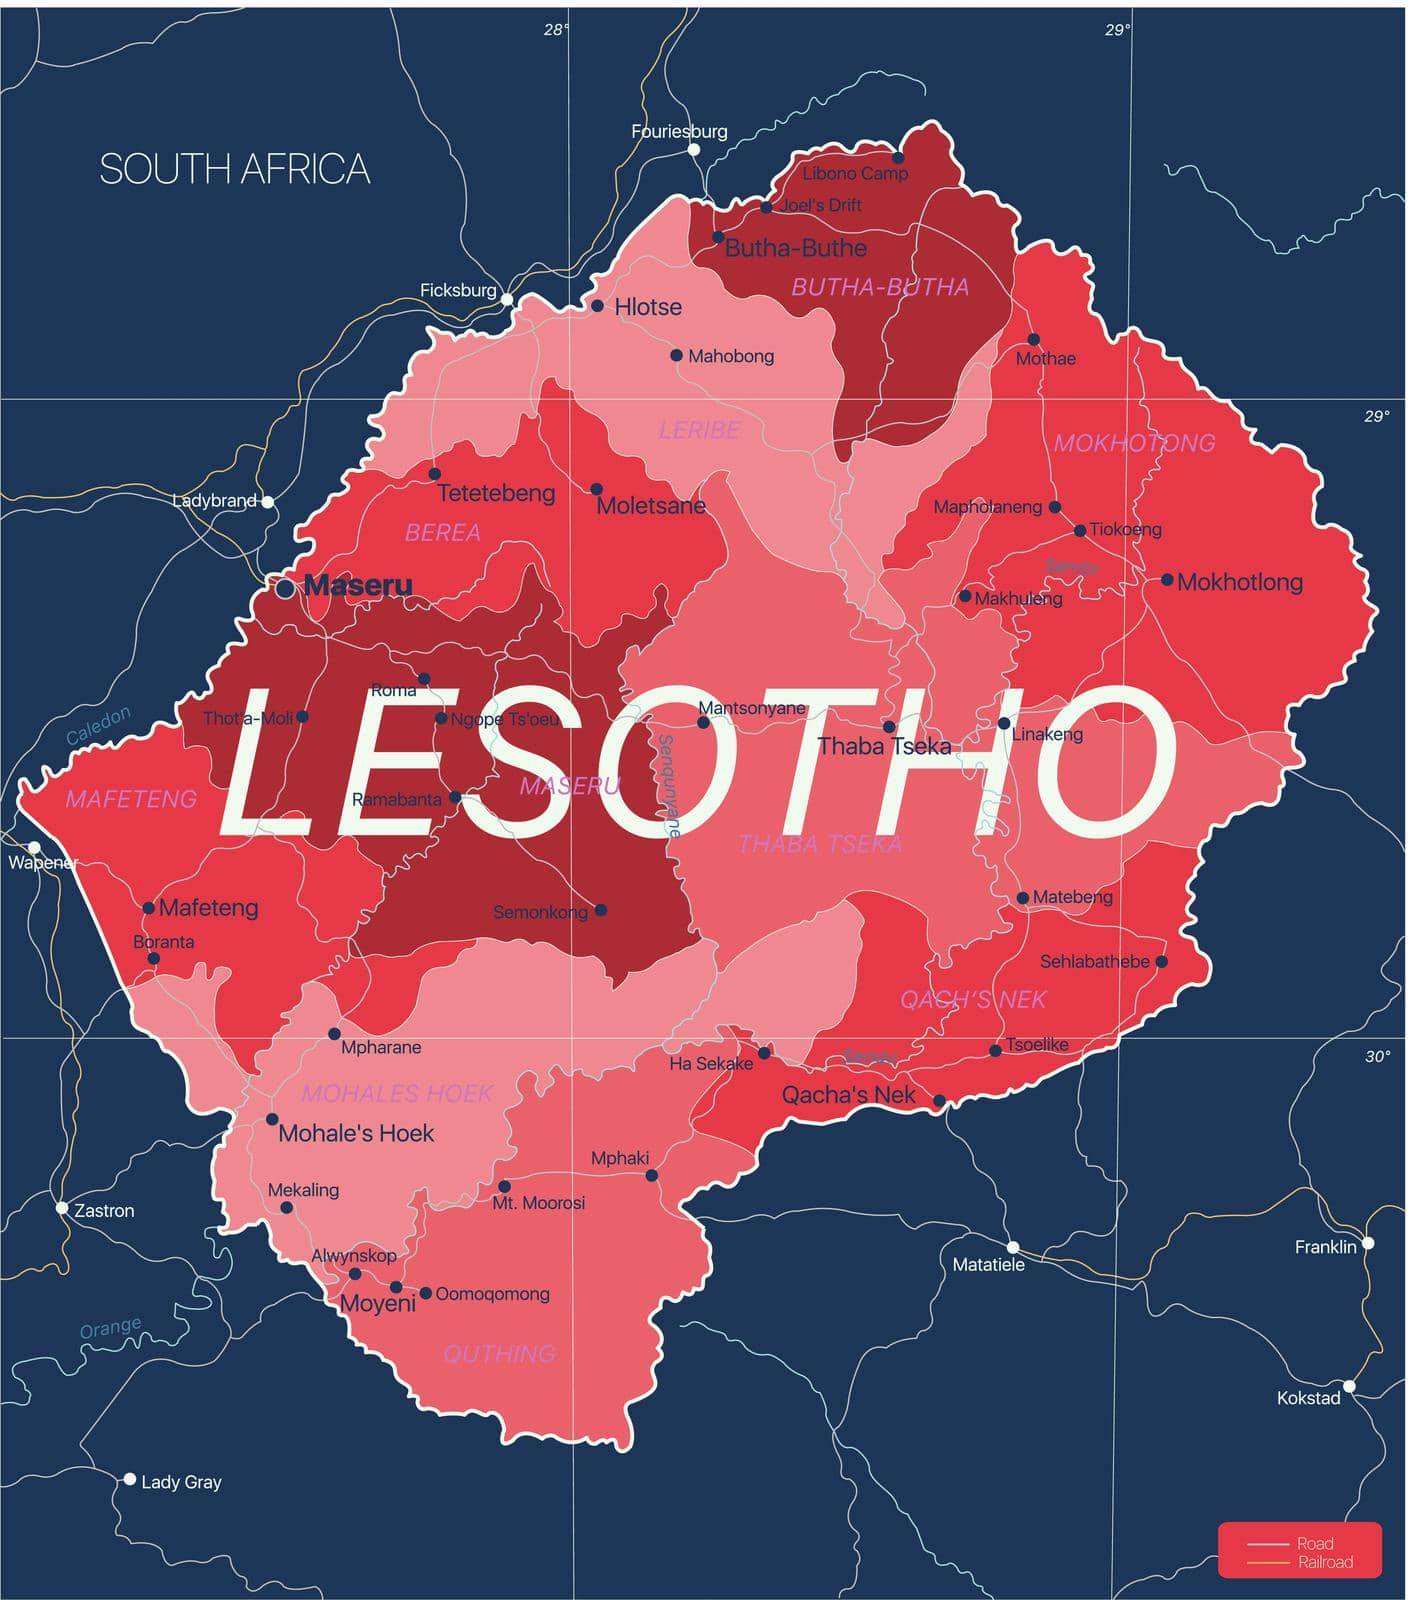 Lesotho country detailed editable map by rusak